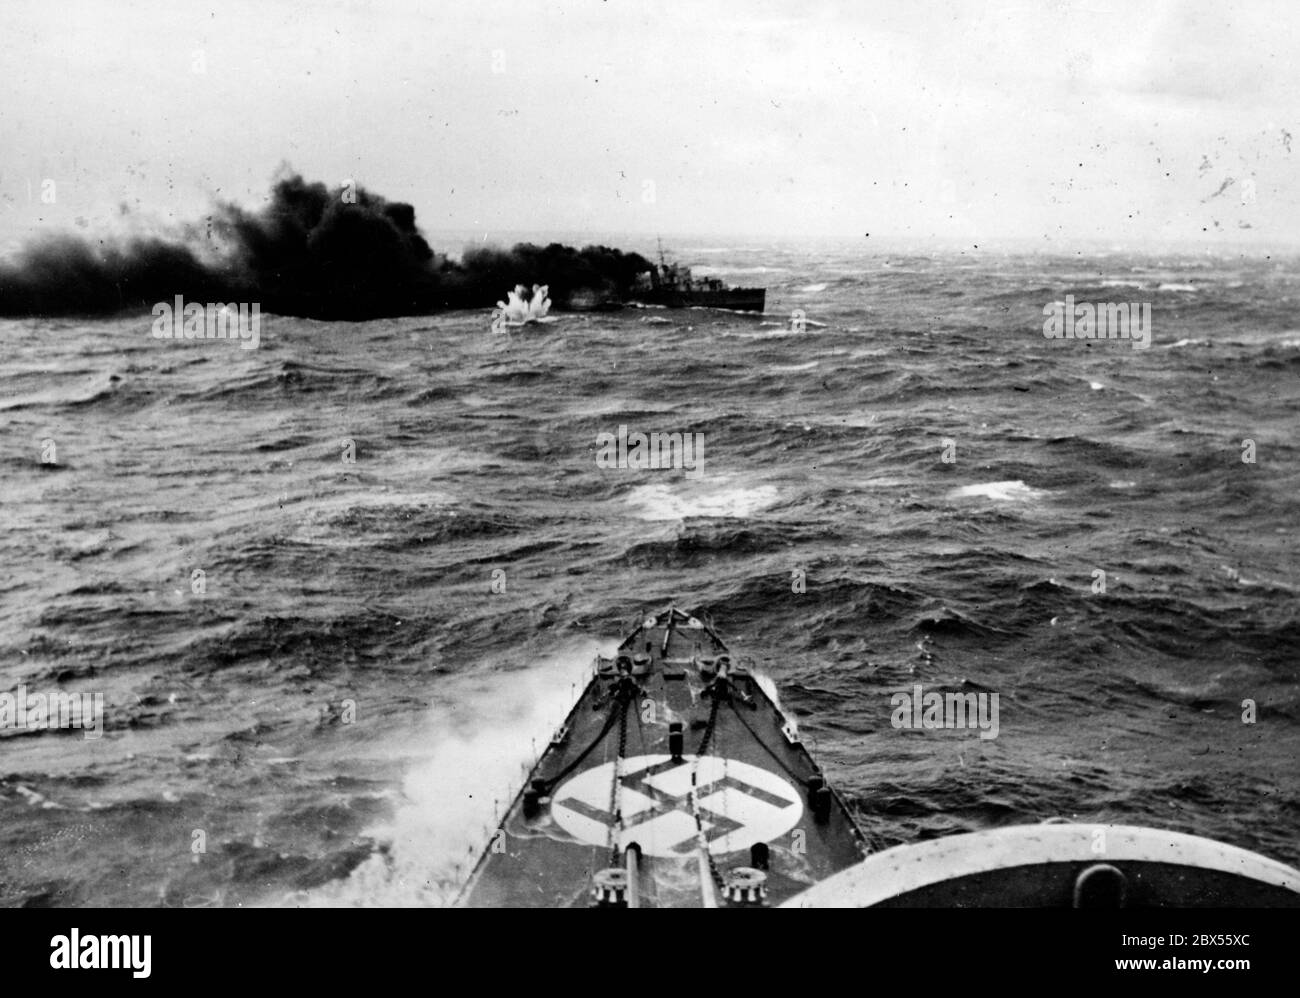 An English destroyer is attacked while cruising to Norway. In the foreground is the bow of a German warship. This is probably the sinking of the British destroyer HMS Glowworm by the German heavy cruiser Admiral Hipper on 08.04.1940. Stock Photo